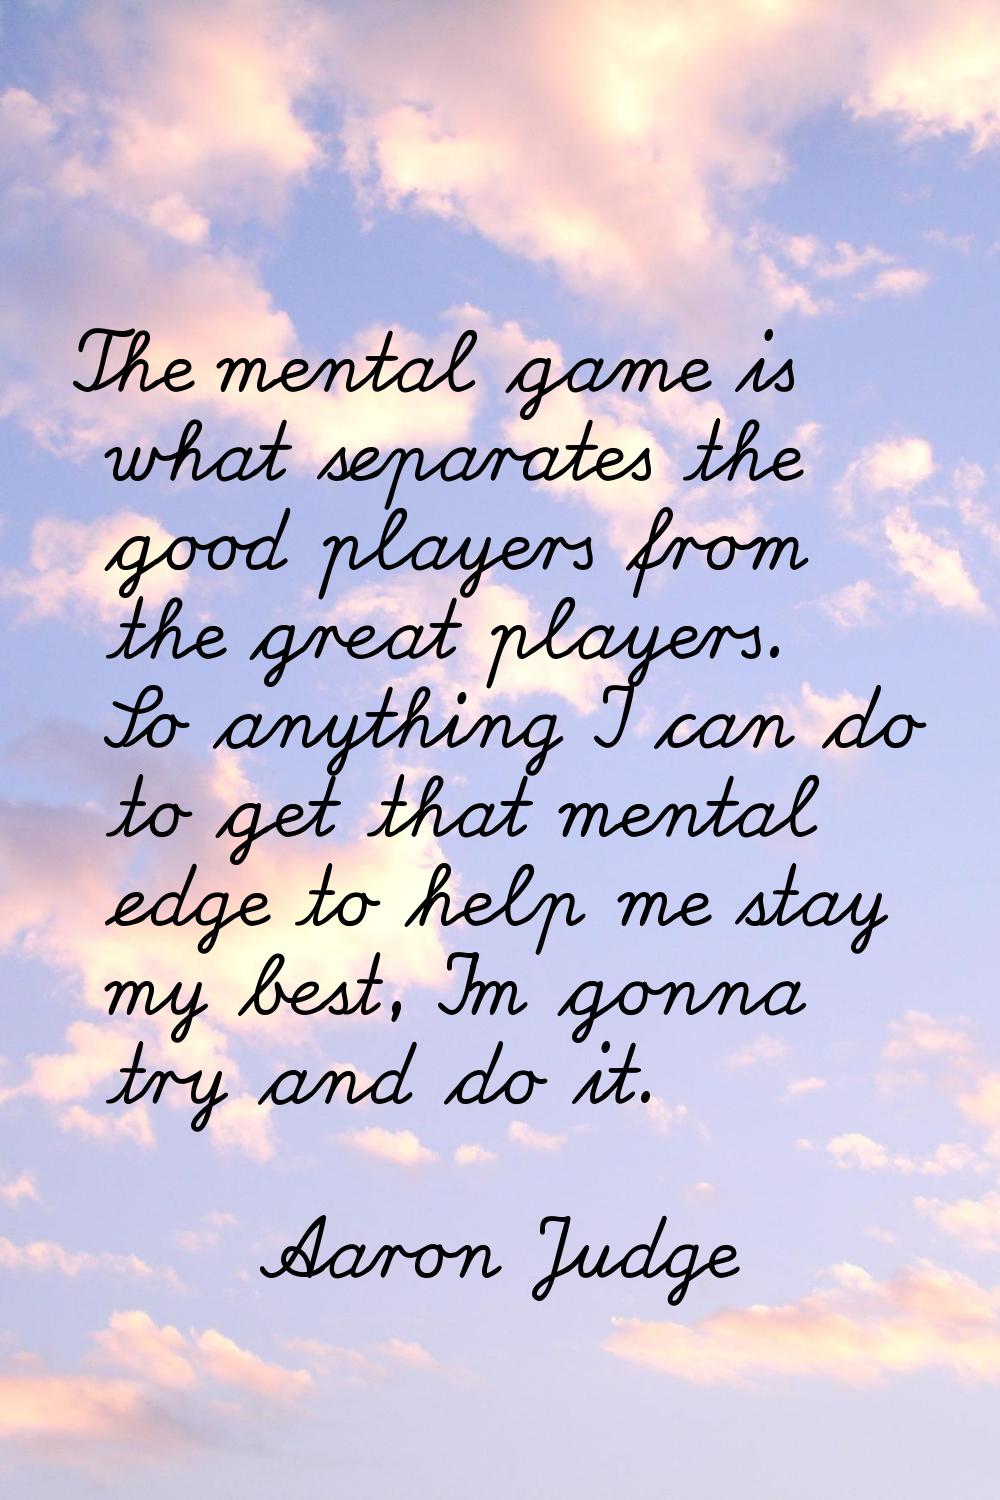 The mental game is what separates the good players from the great players. So anything I can do to 